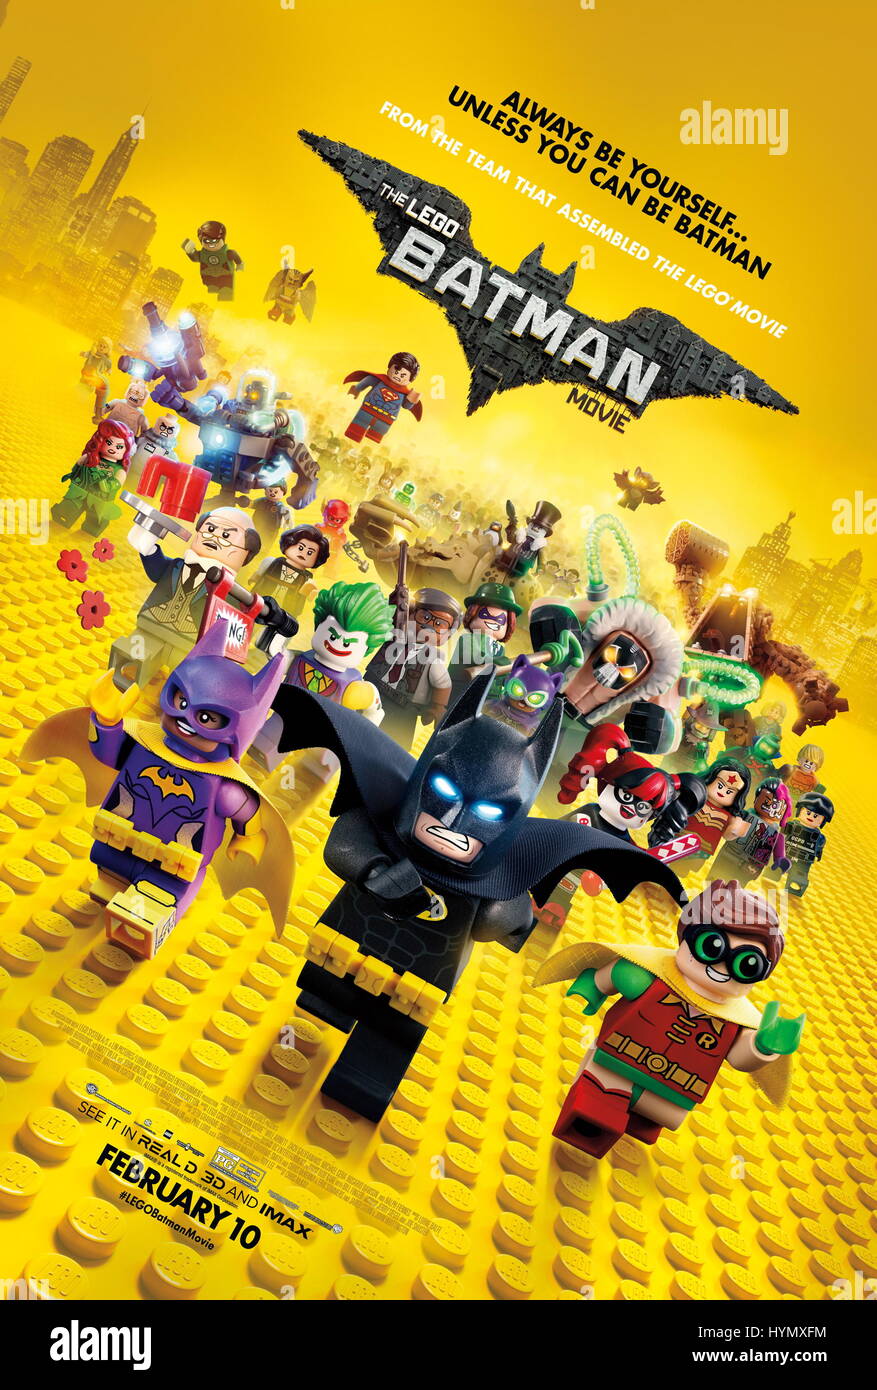 RELEASE DATE: February 10, 2017 TITLE: The LEGO Batman Movie STUDIO: DC Entertainment DIRECTOR: Chris McKay PLOT: A cooler-than-ever Bruce Wayne must deal with the usual suspects as they plan to rule Gotham City, while discovering that he has accidentally adopted a teenage orphan who wishes to become his sidekick STARRING: (Credit: © DC Entertainment/Entertainment Pictures) Stock Photo